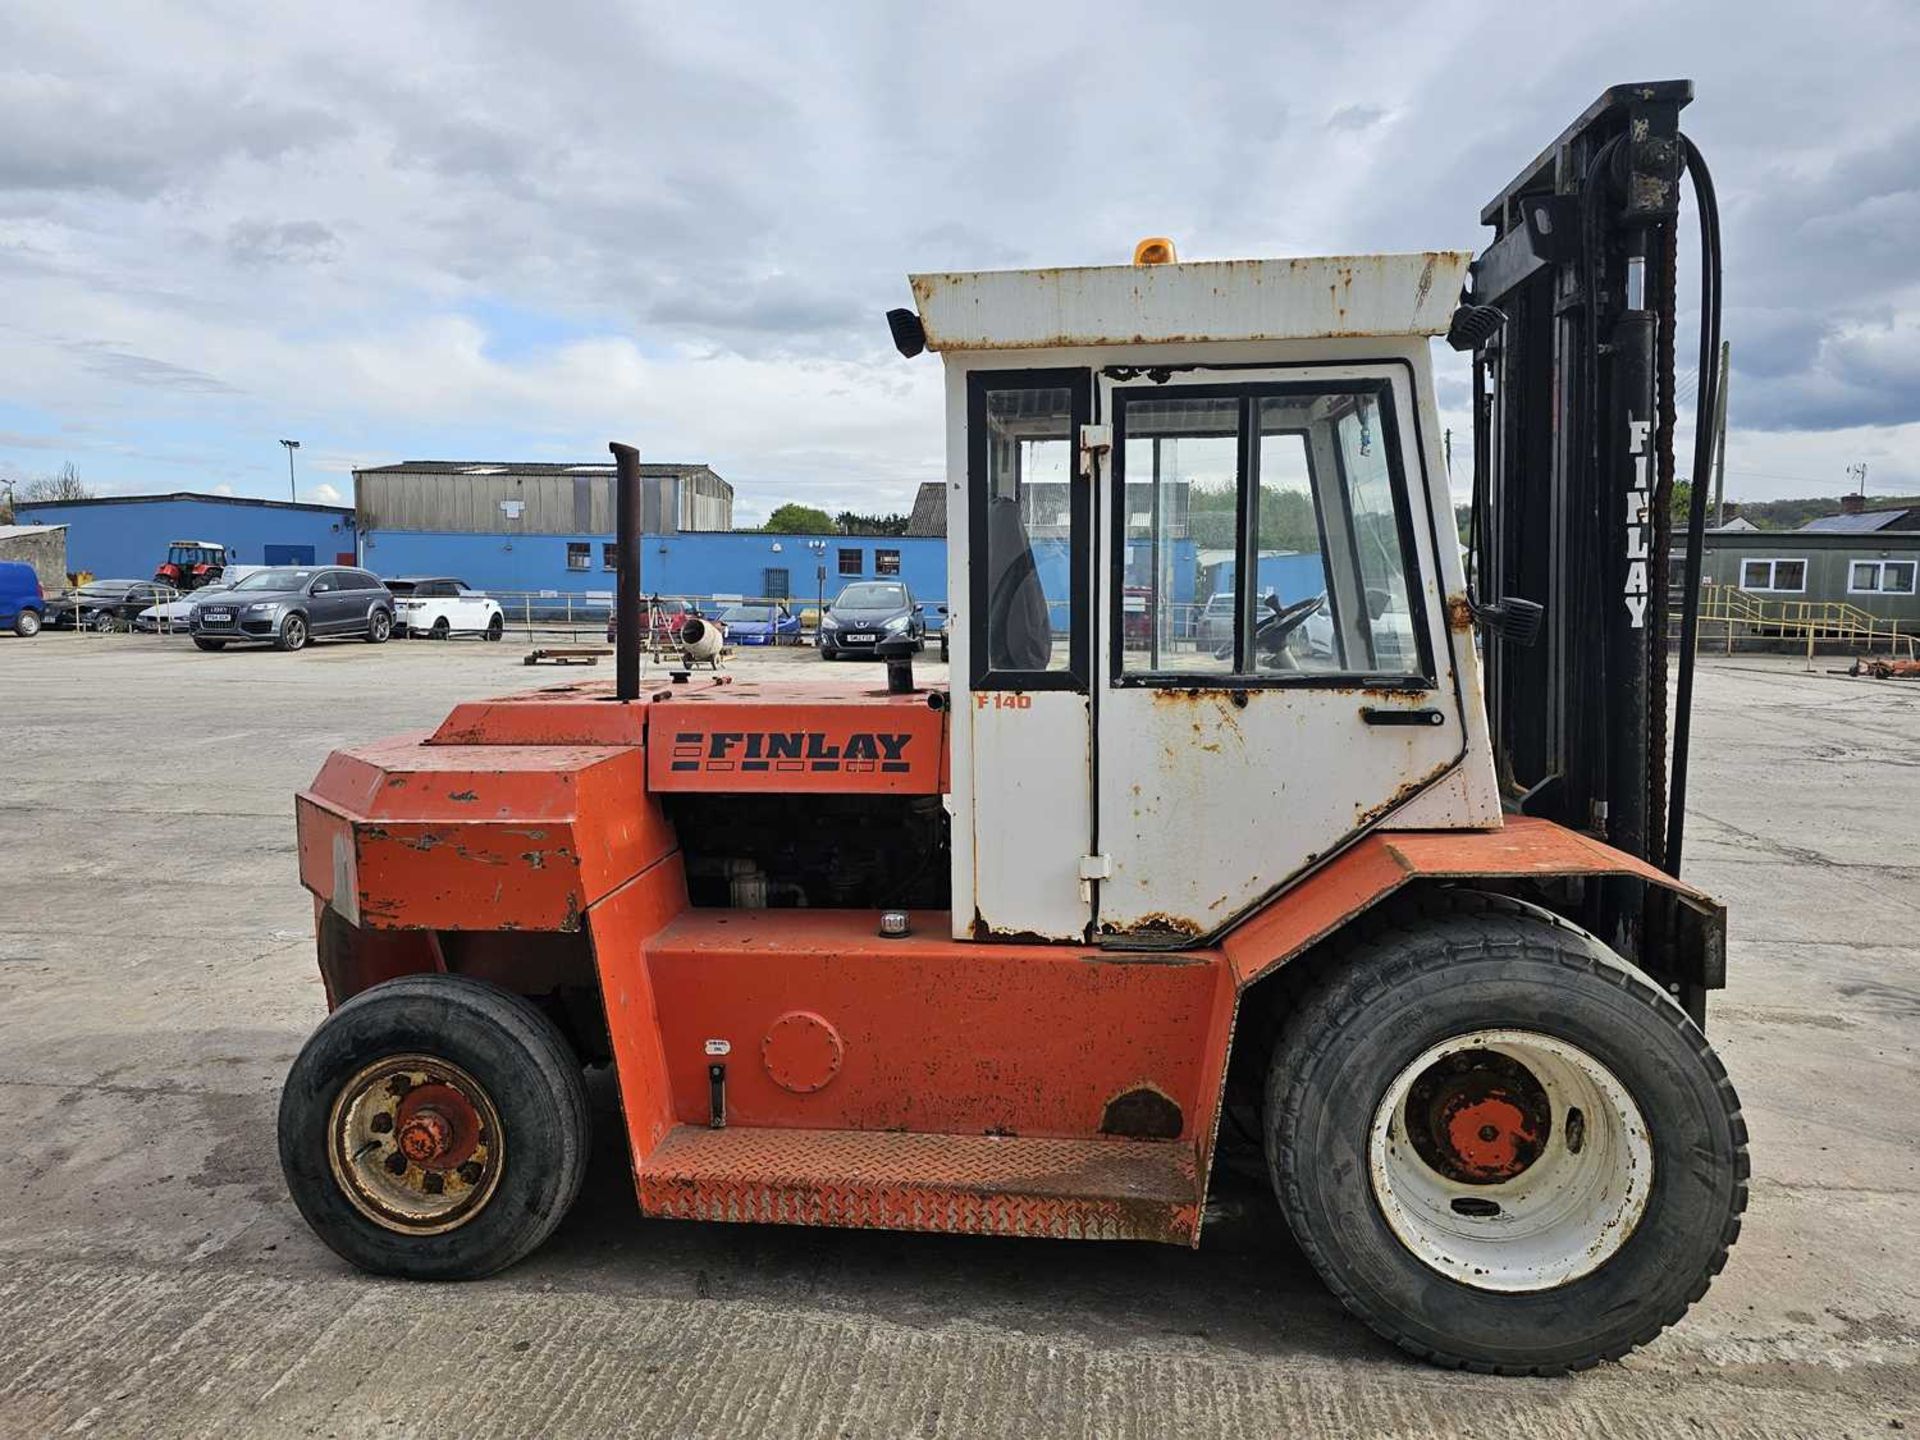 Finlay F140 7 Ton Diesel Forklift, 2 Stage Mast - Image 6 of 20